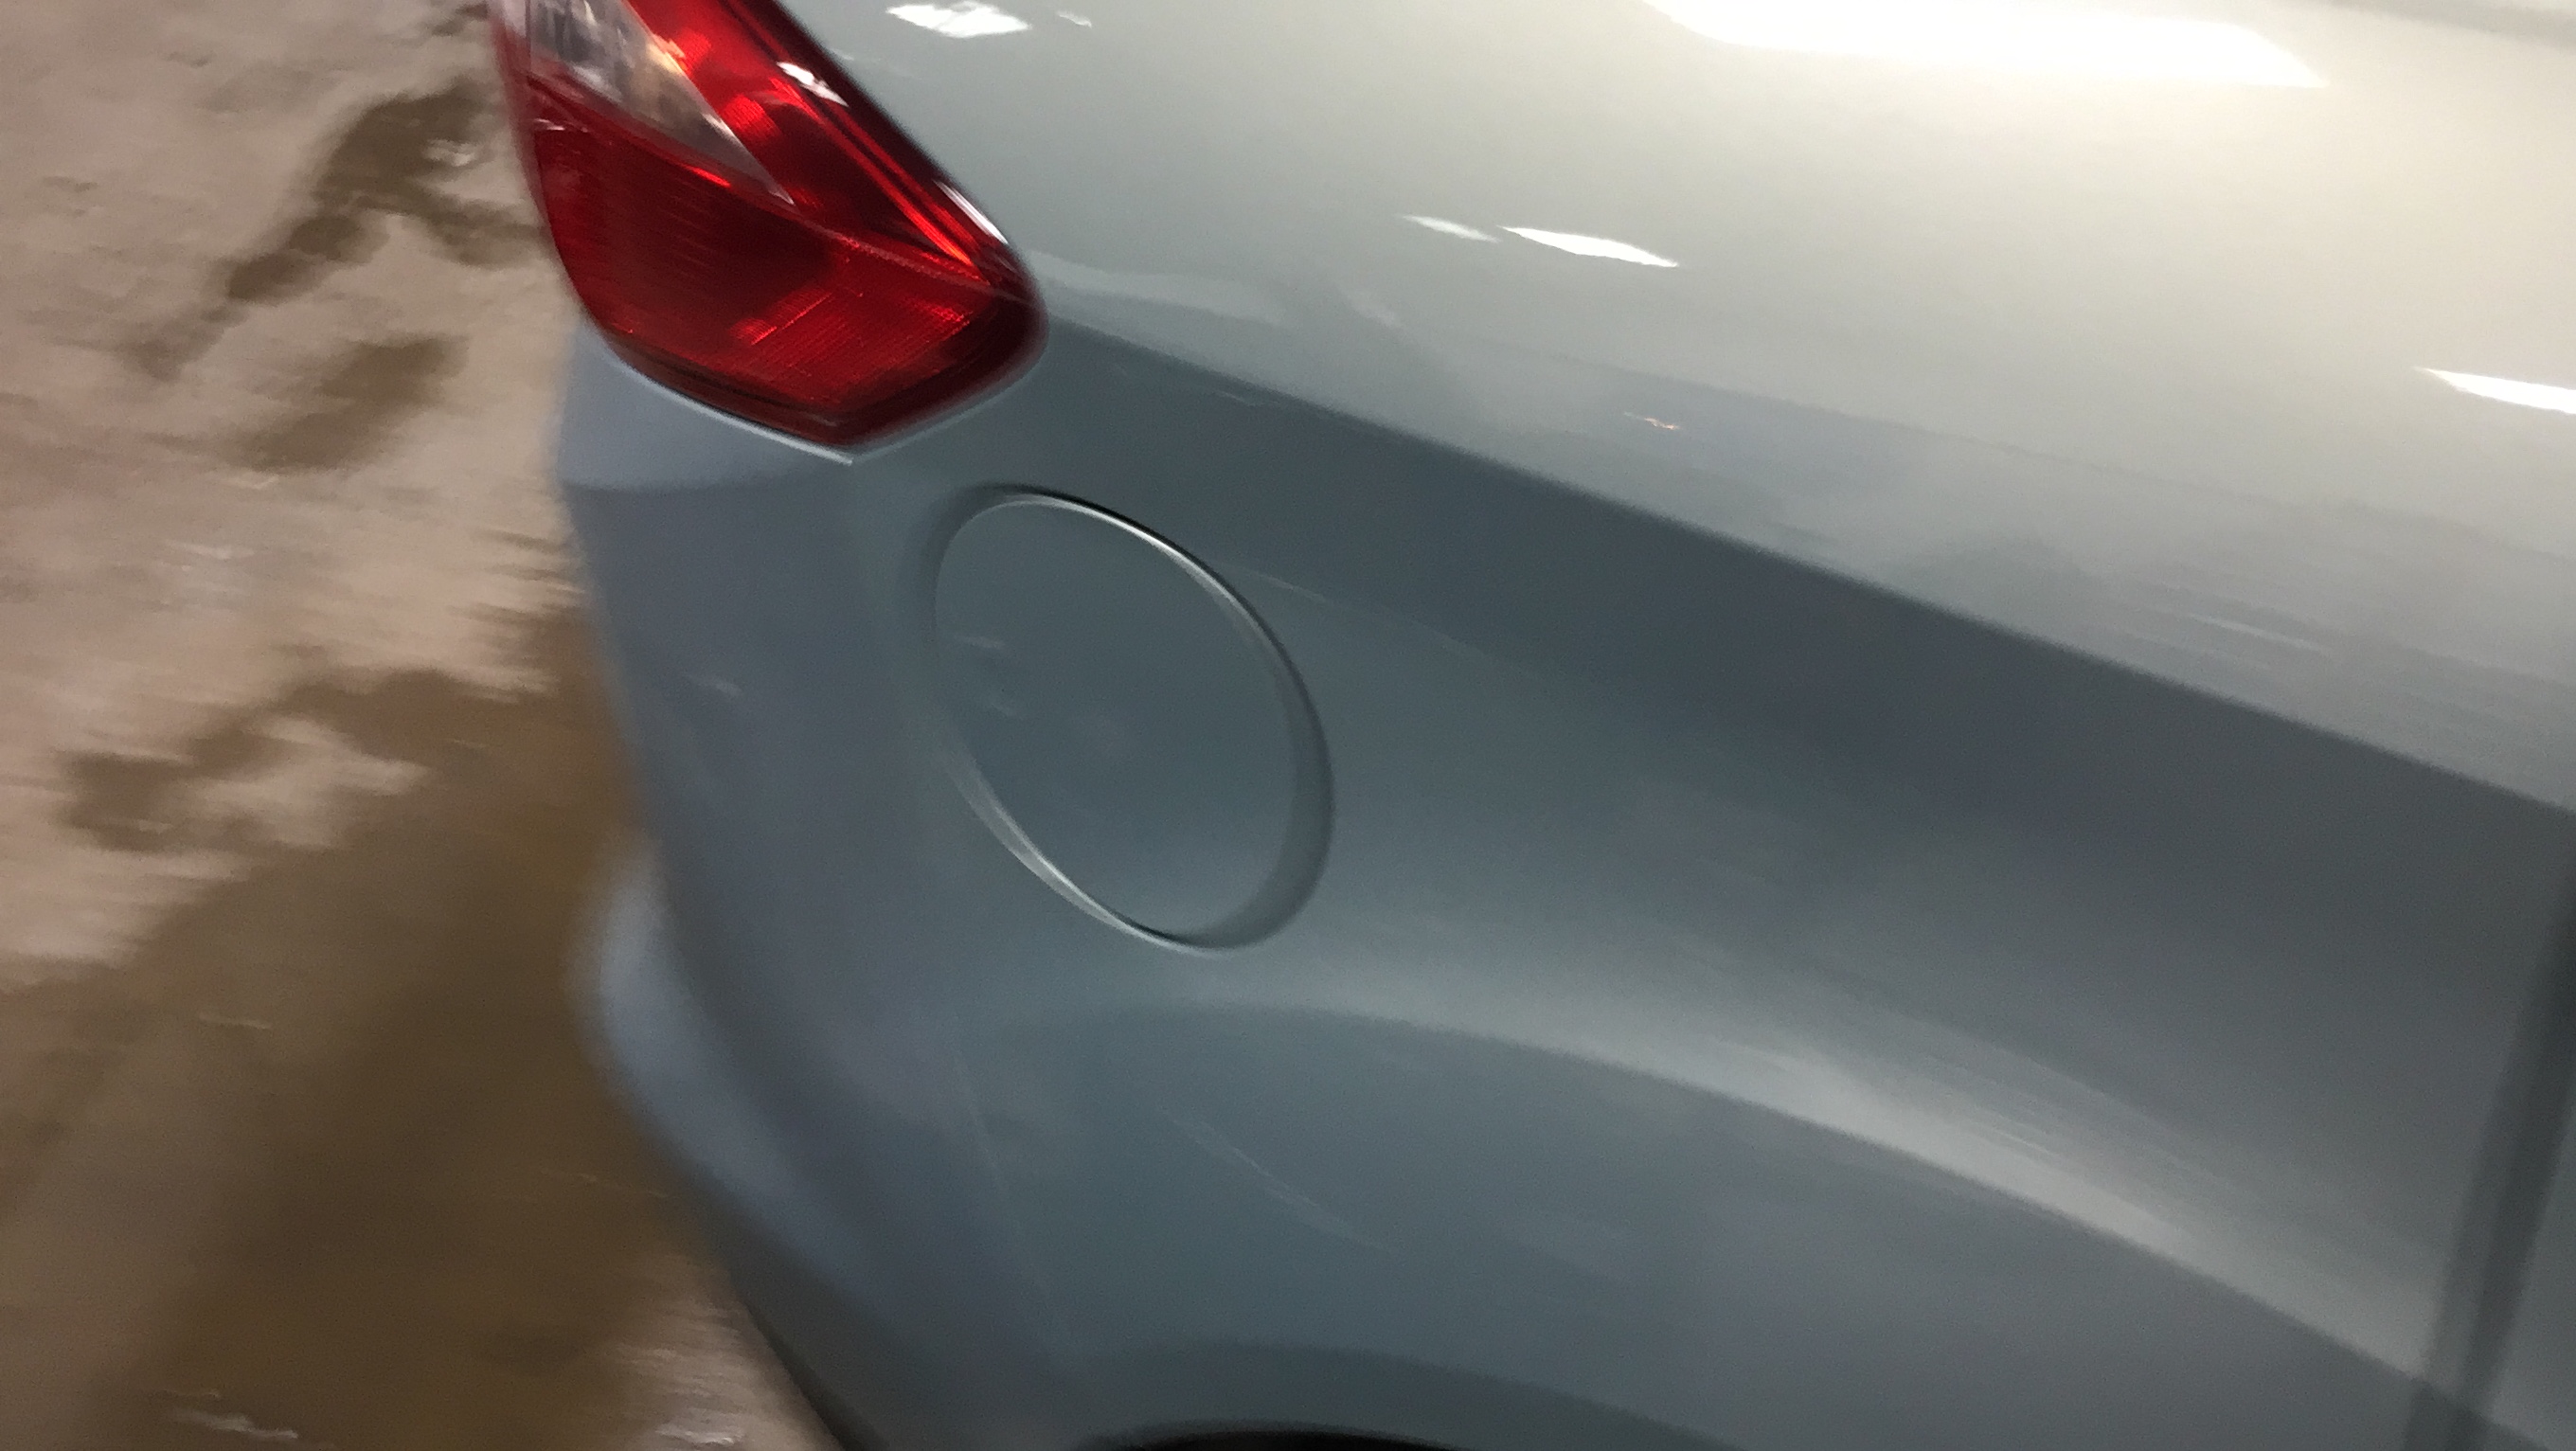 2013 Ford C-Max Hybrid large dent in passenger rear quarter, access through tail light images of access to damaged area. Work done by "dent expert" Michael Bocek from 217dent.com. For more information go to 217dent.com or 217hail.com